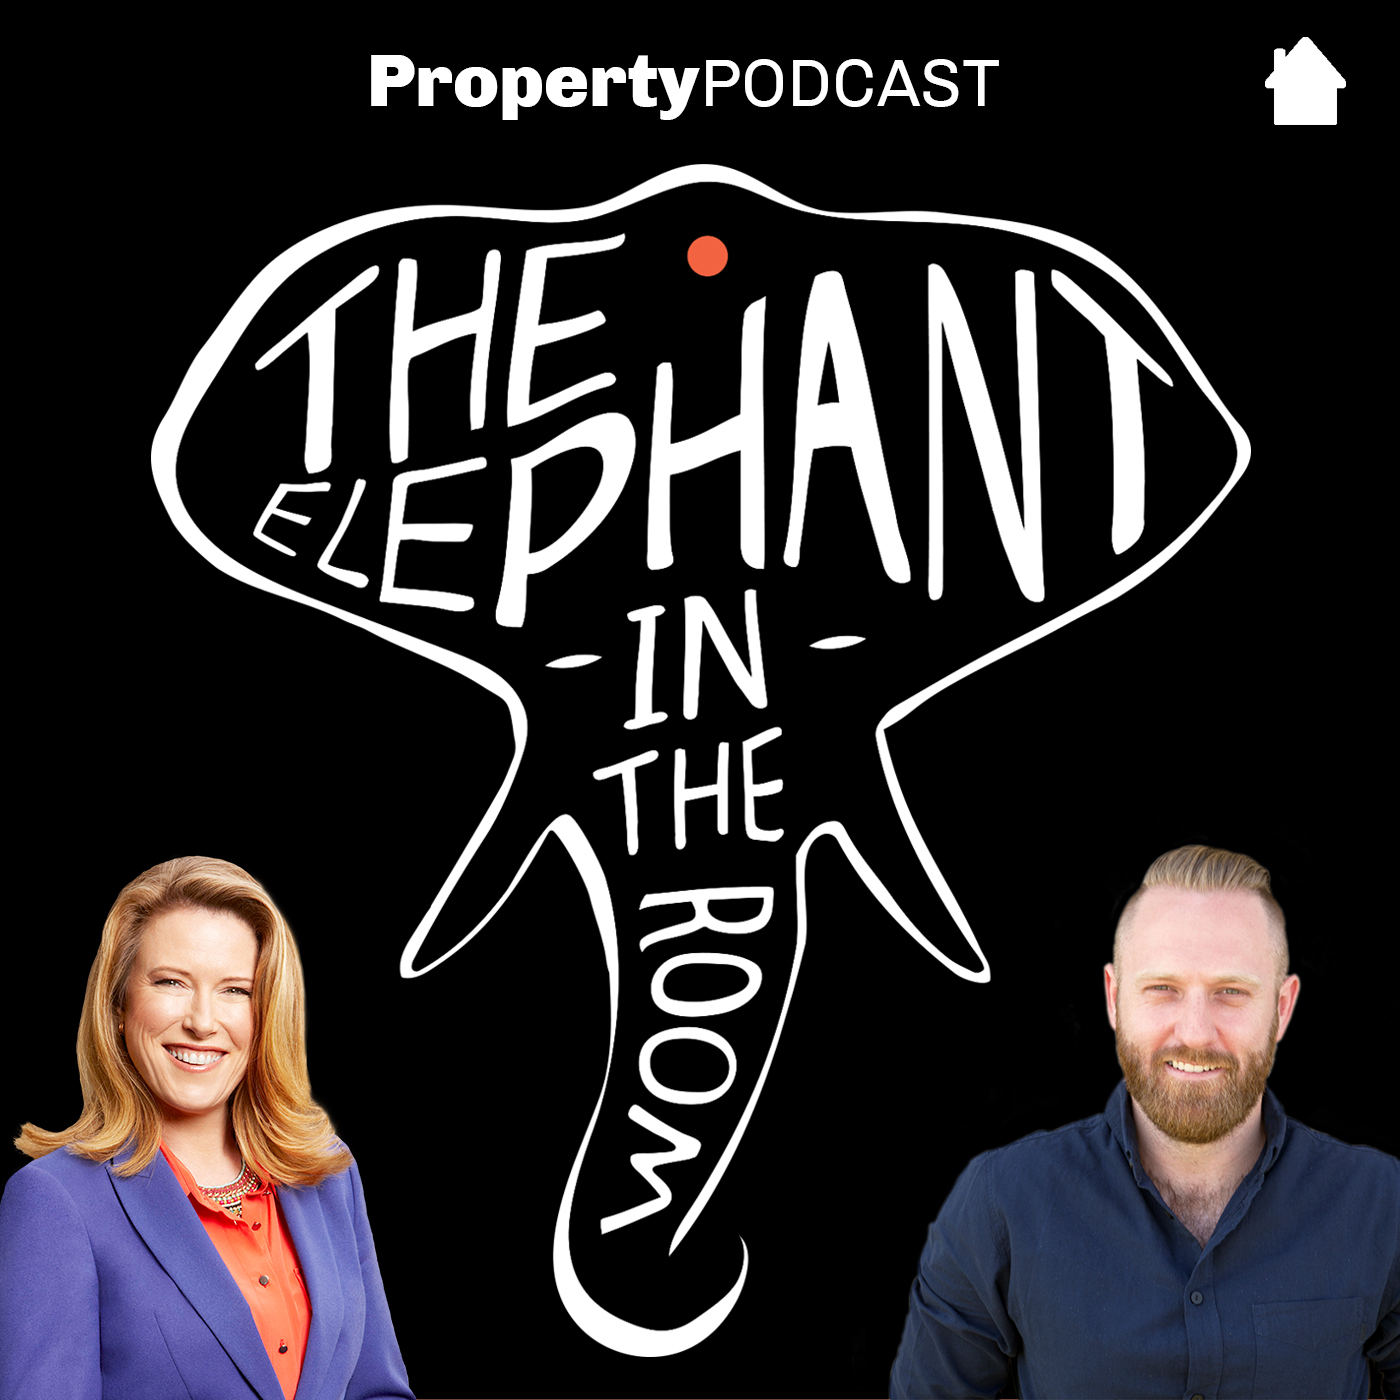 Stuart Wemyss | Lending rules & predicting the property market | Insights from Investopoly